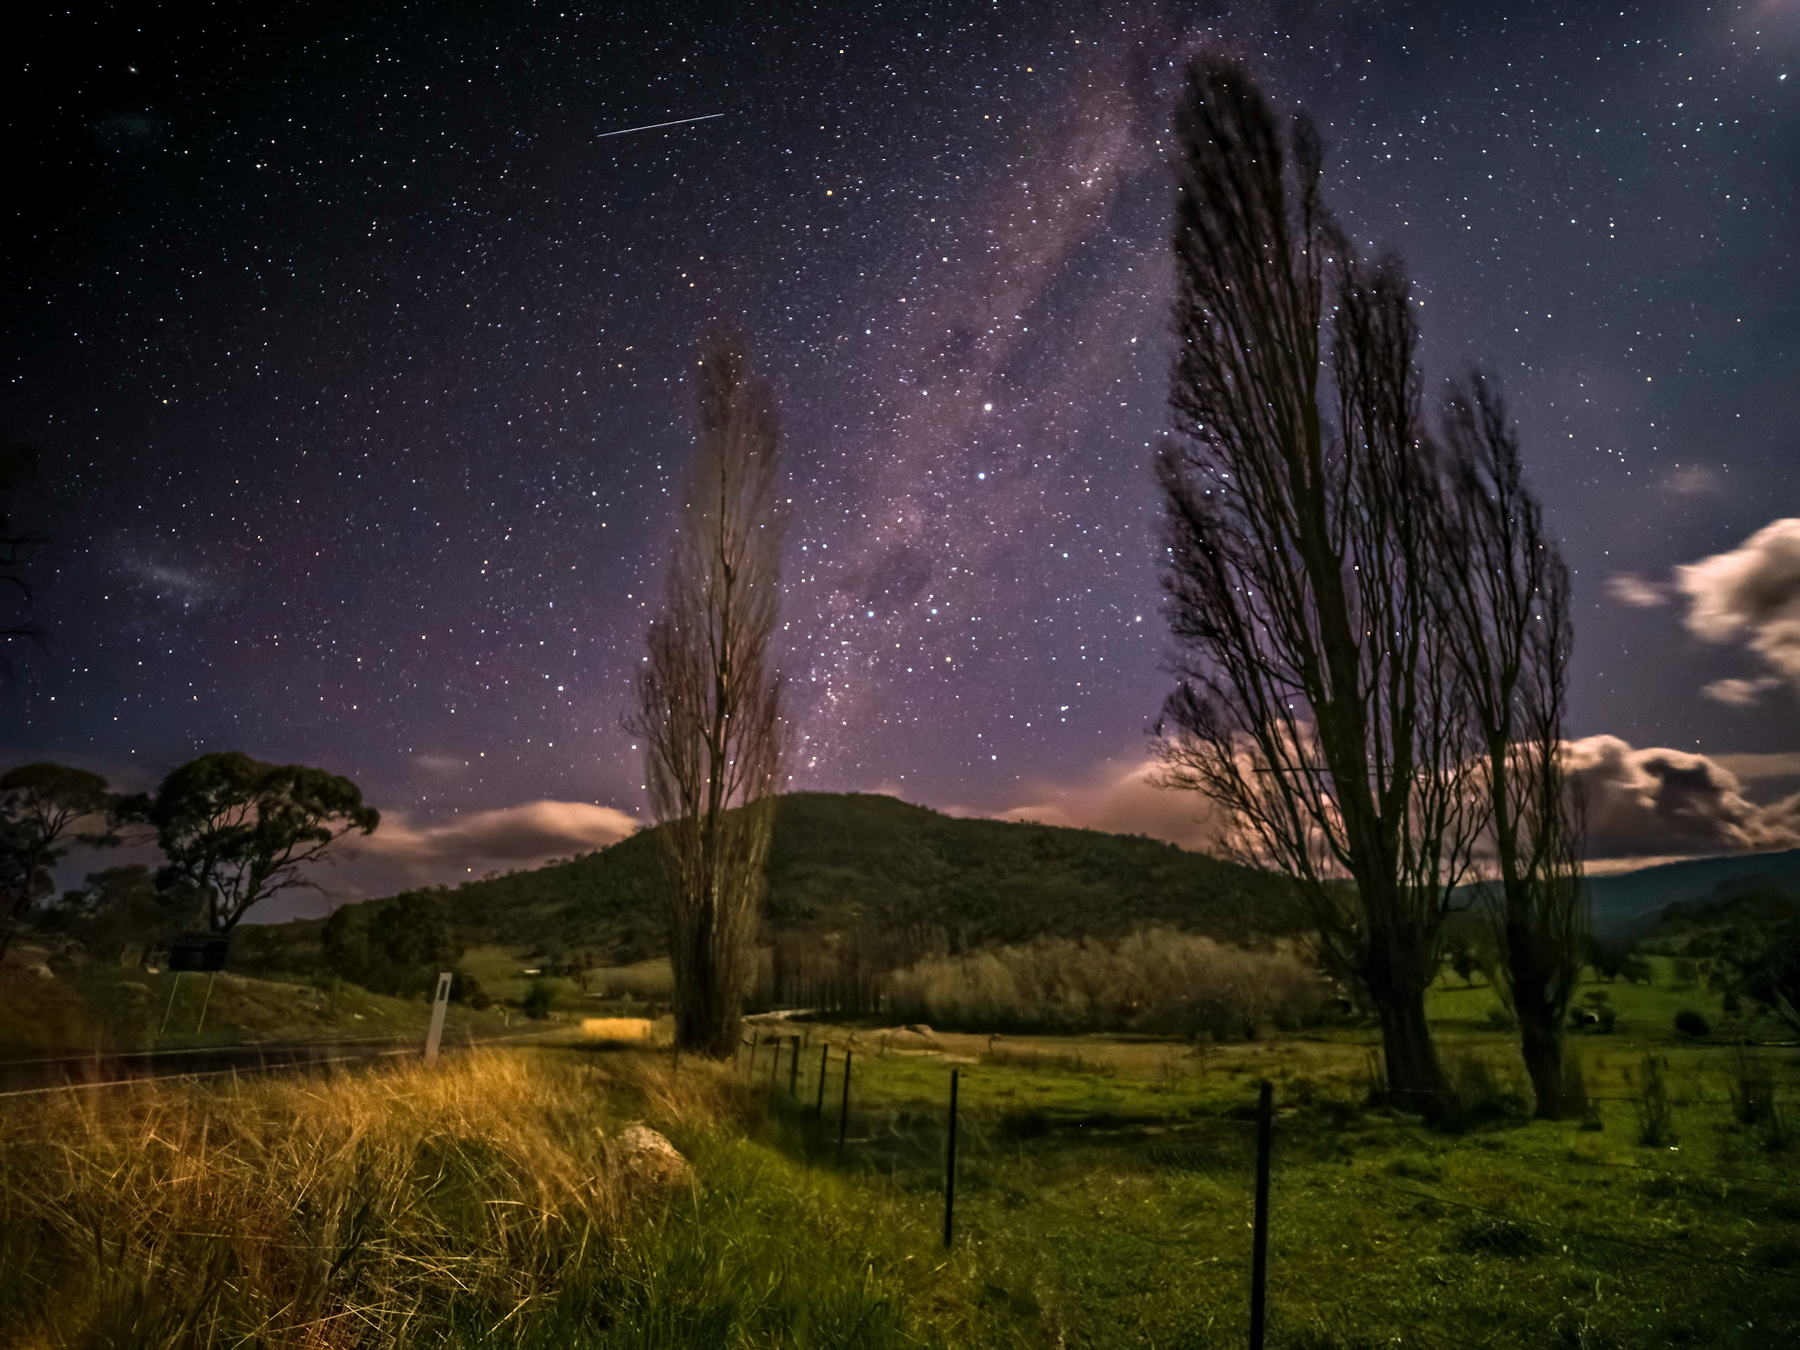 Image of the Milky Way shot from the side of Naas Road, south of Canberra.